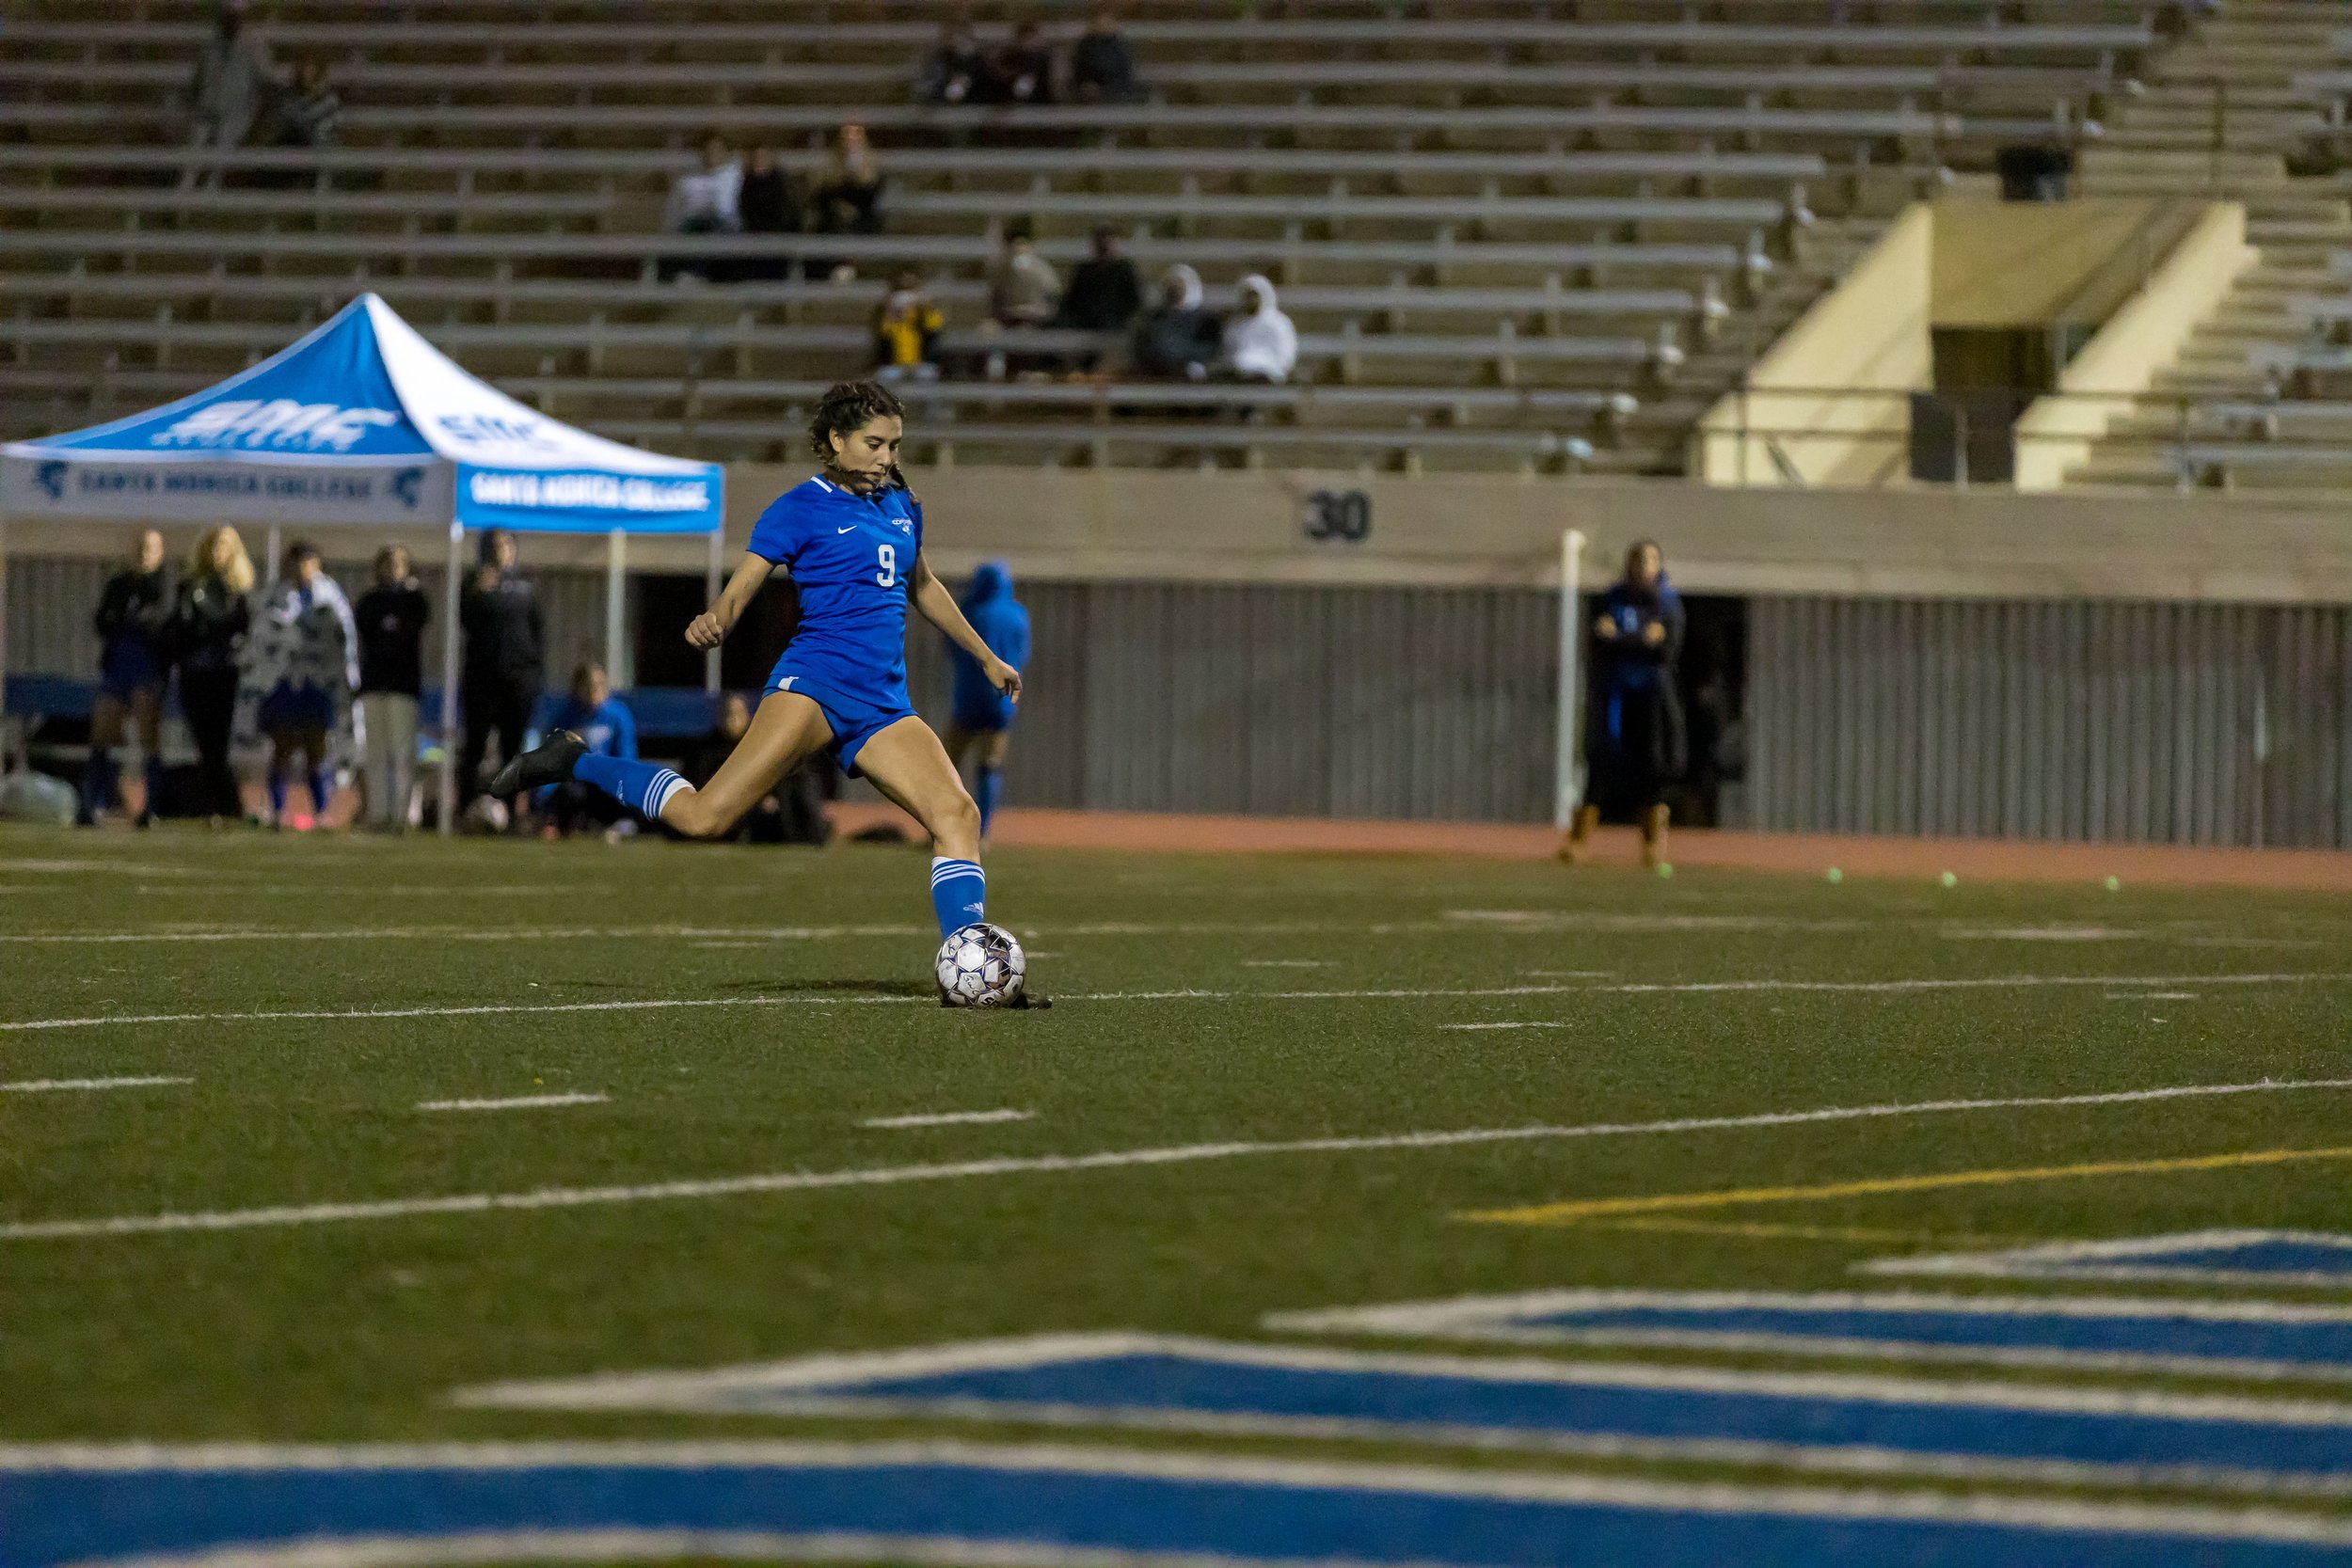  Freshman Alexia Mallahi(9) takes a penalty kick in OT2 Santa Monica College played against El Camino College in a California Community College Women's Soccer Southern California Regional Play-In game on November 18, 2021. The game was a 1-1 tie afte